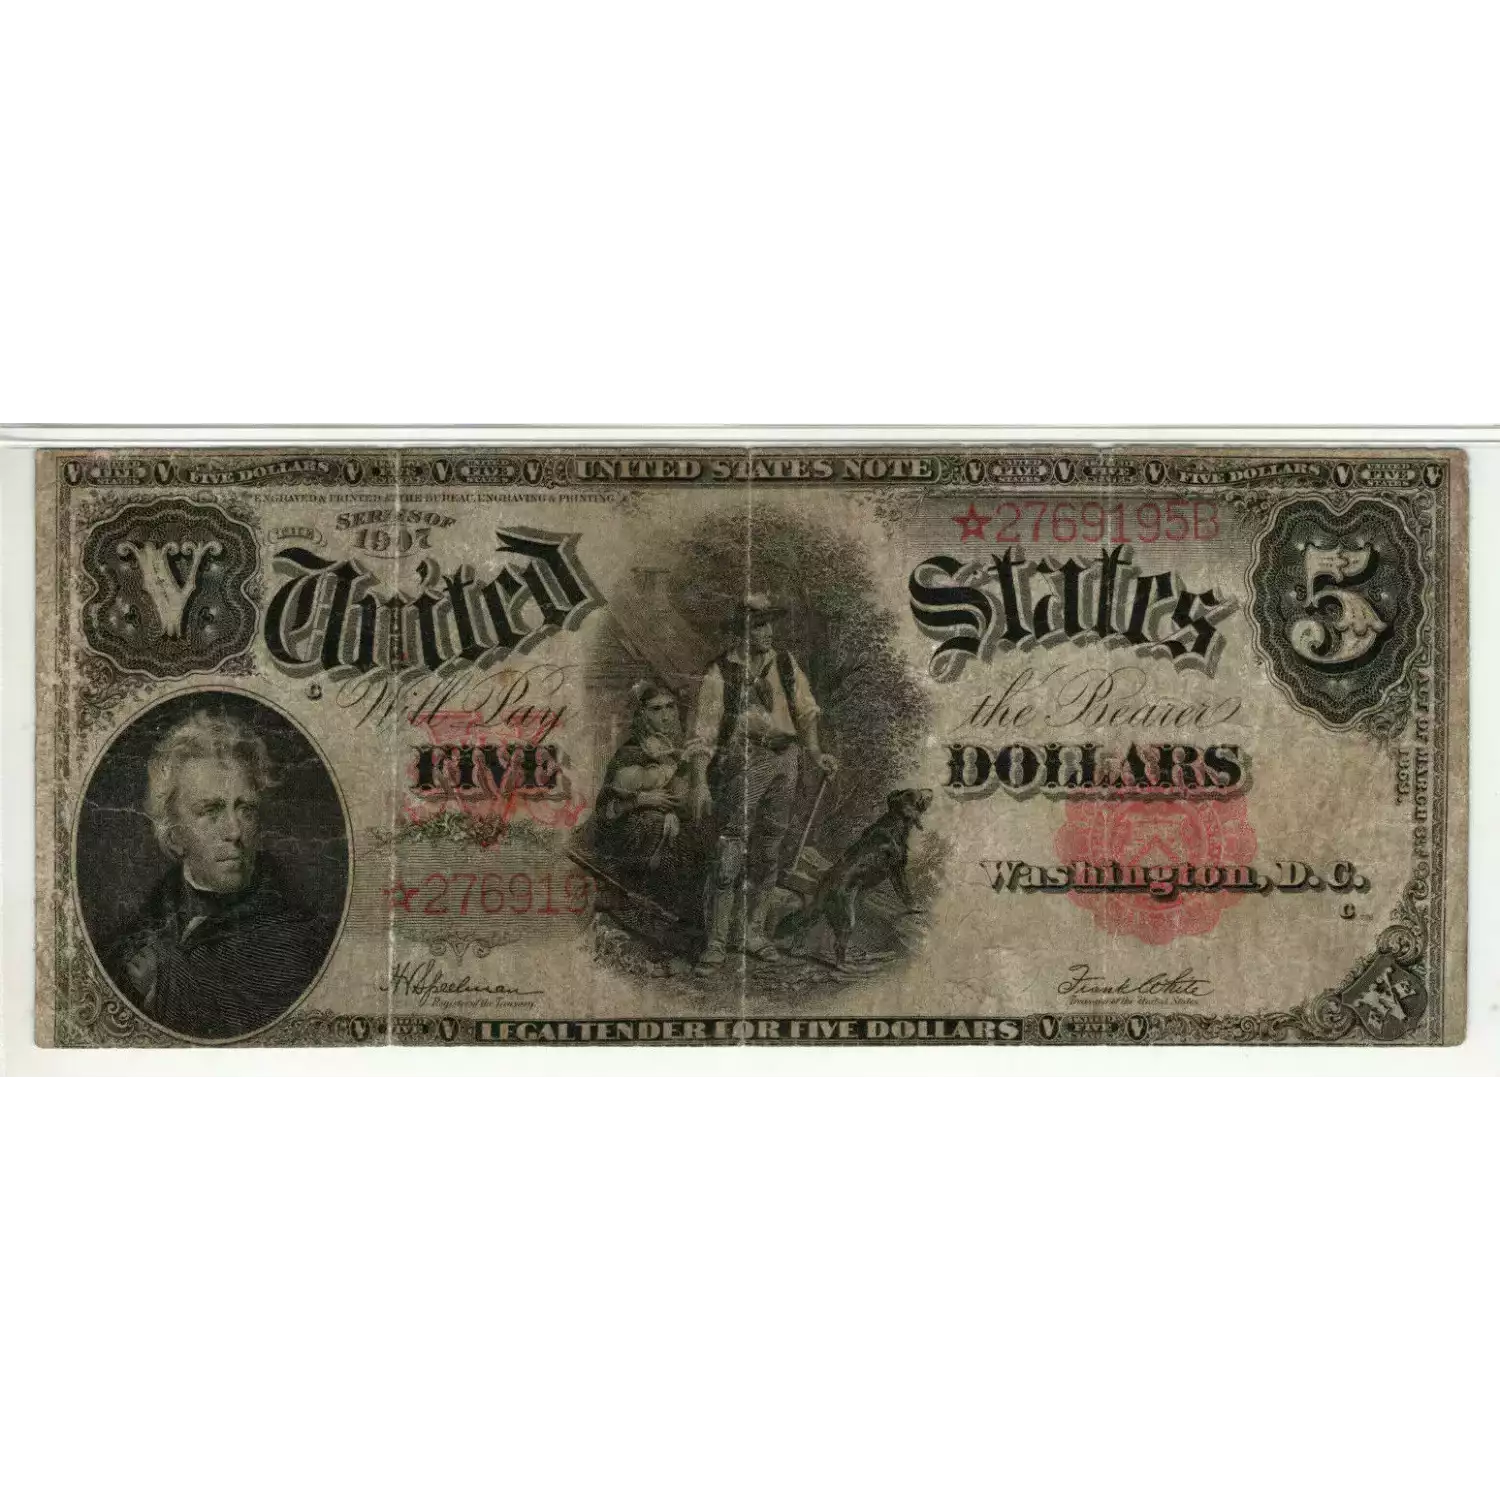 $5  Small Red, scalloped Legal Tender Issues 91* (3)